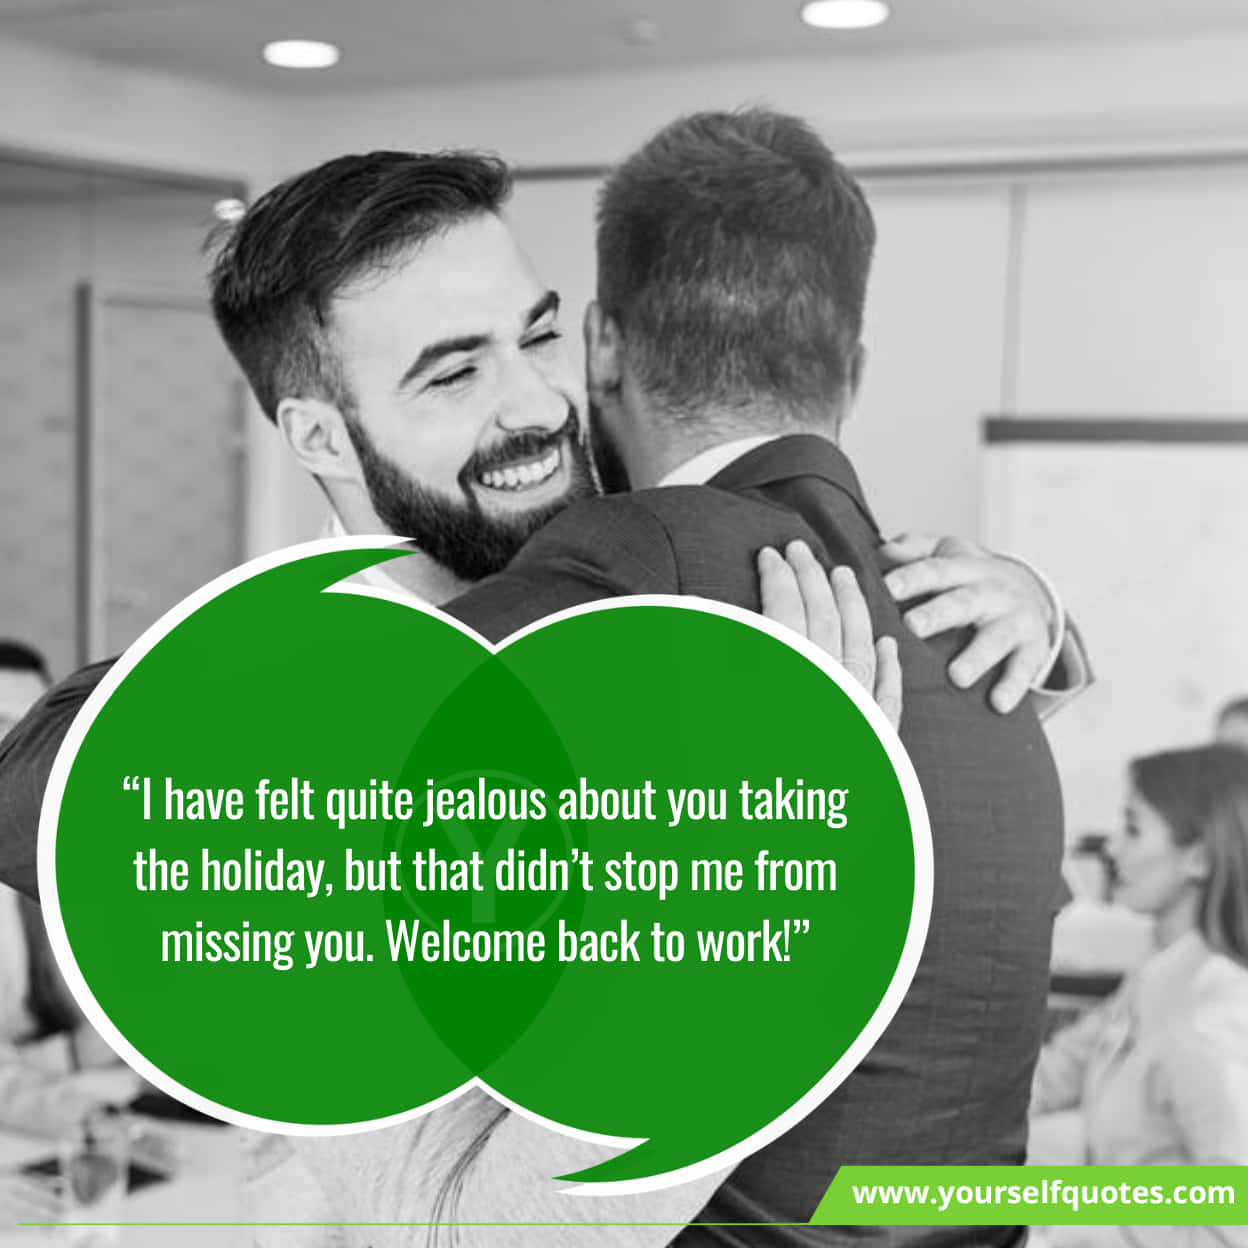 66 Welcome Back To Work Messages To Make Welcome Happy